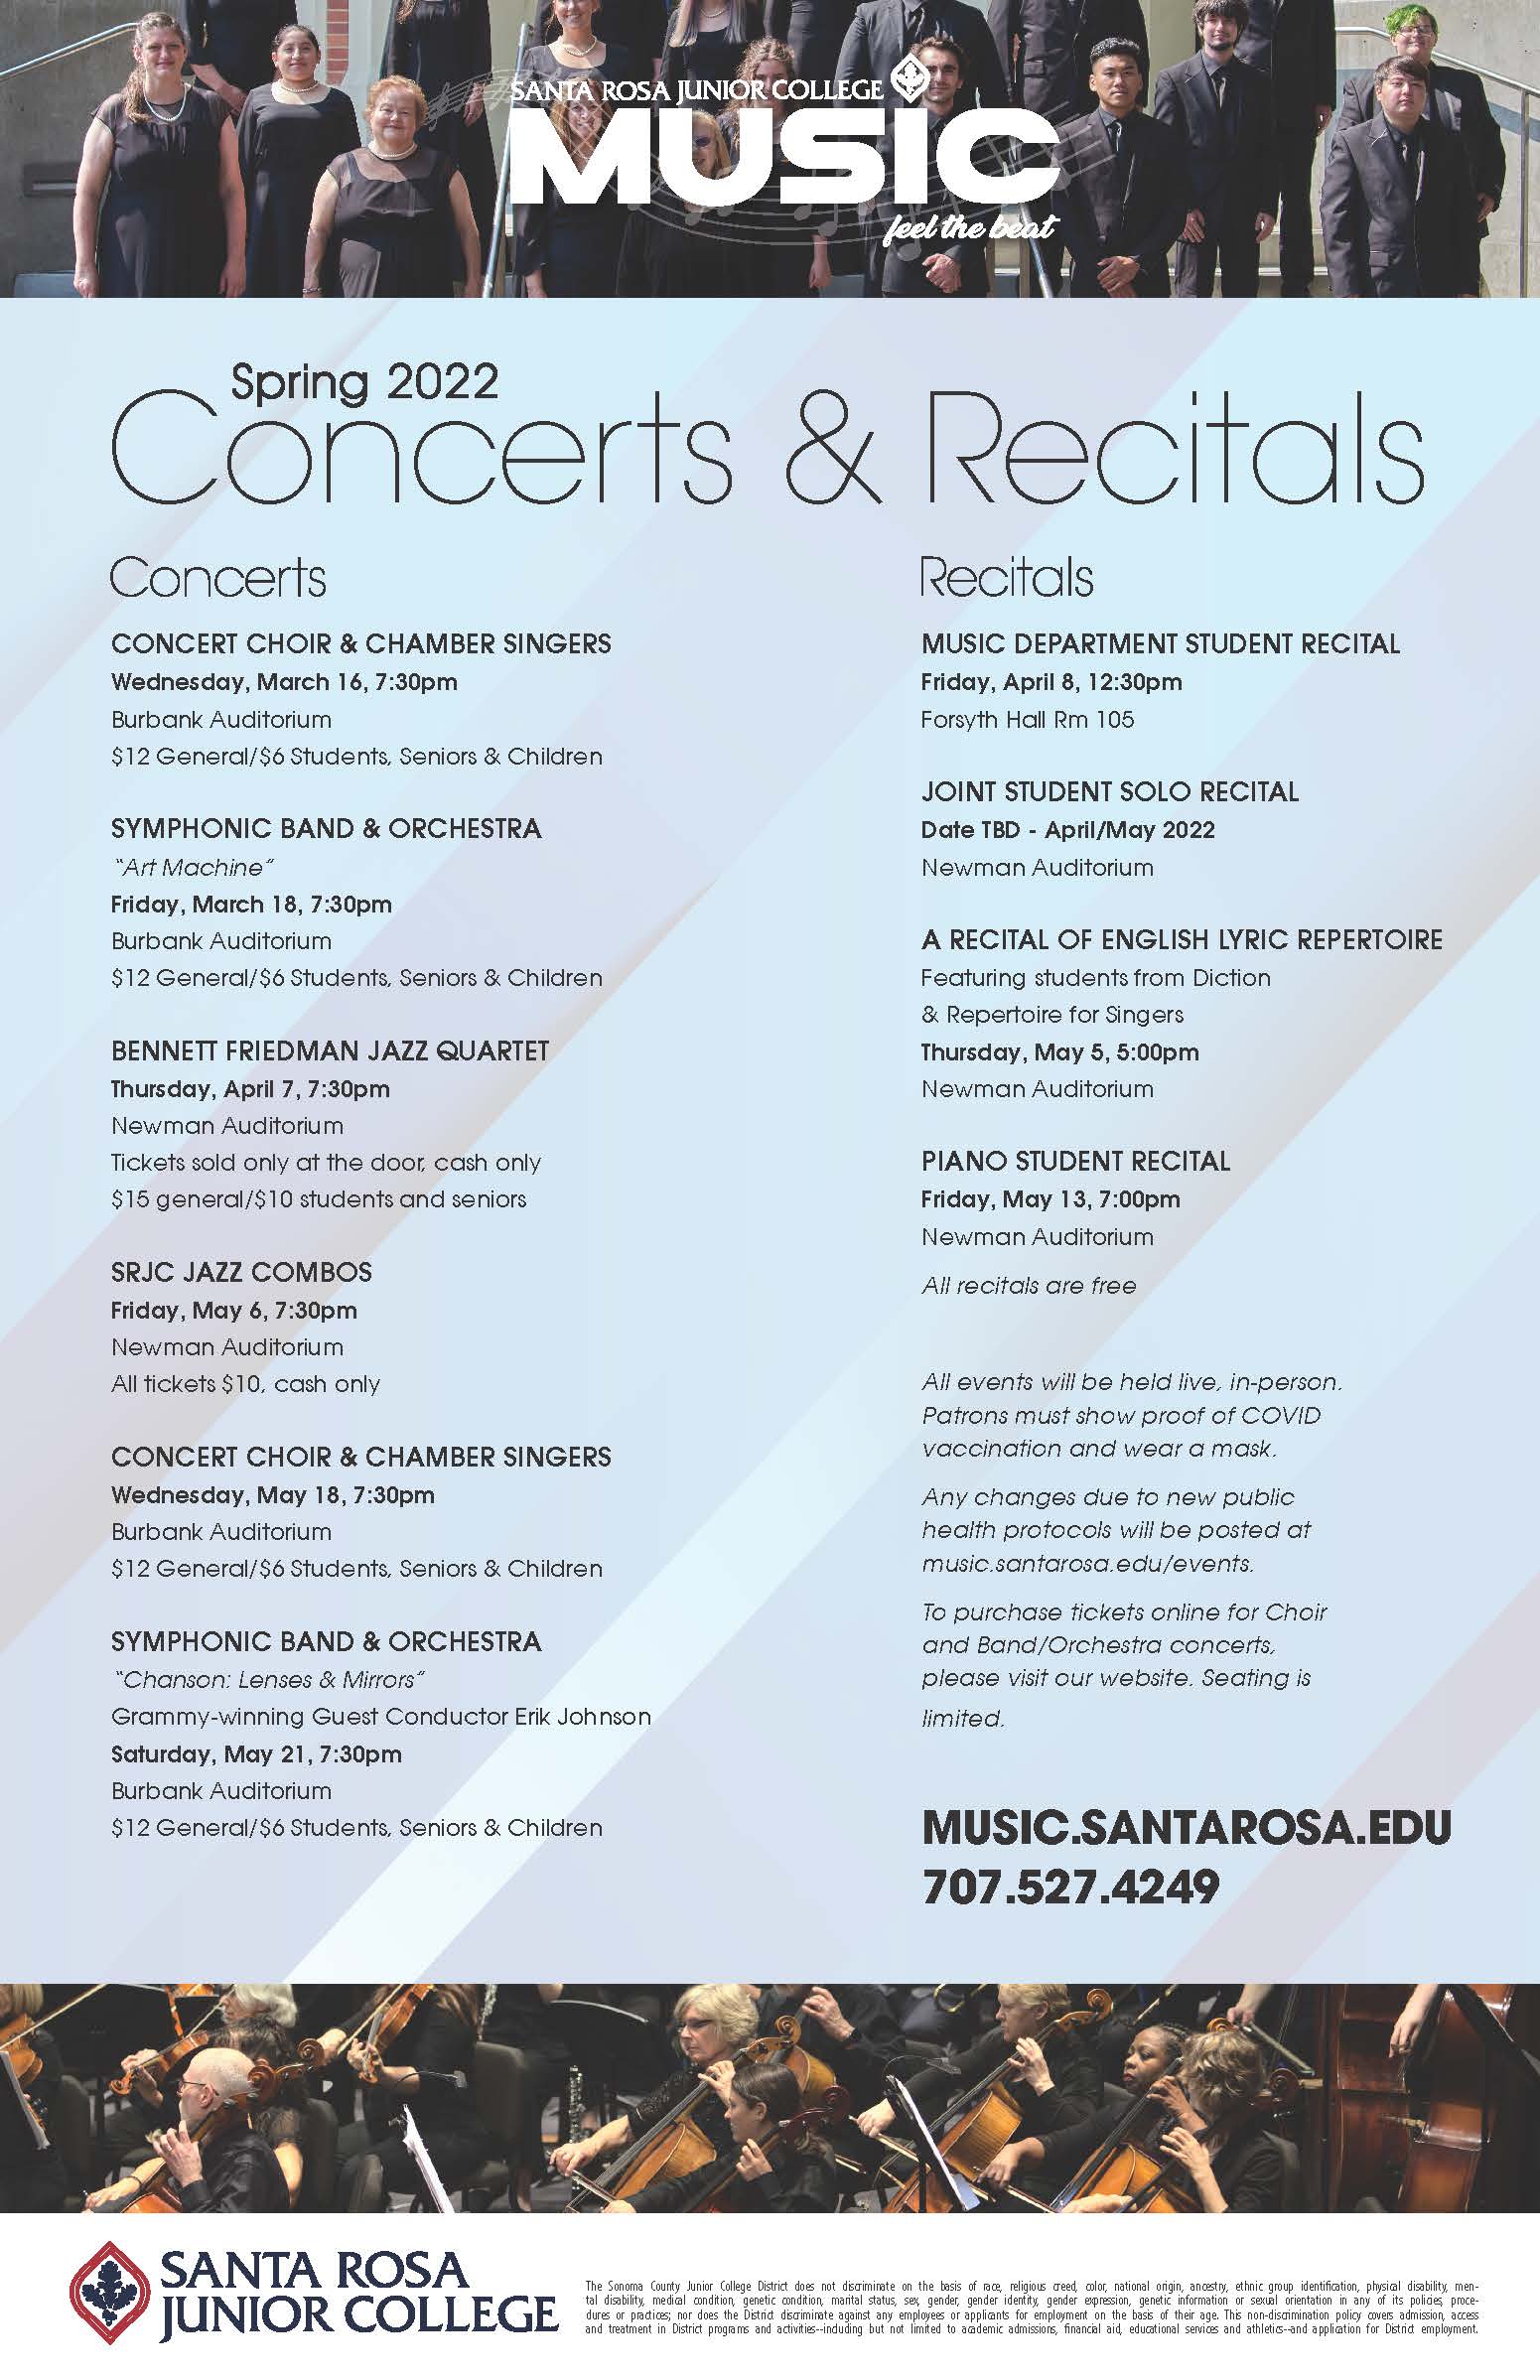 Concerts: Concert Choir and Chamber Singers - Wednesday March 16th at 7:30 PM, Wednesday May 18th at 7:30 PM. Symphonic Band and Orchestra - Friday March 18th at 7:30 PM, Saturday May 21 at 7:30 PM. SRJC Jazz Combos - Friday May 6 at 7:30 PM. Recitals: Music Department Student Recital - Friday April 8 at 12:30 PM. Joint Student Solo Recital - Date TBD/April or May 2022. A recital of English Lyric Repertoire - Thursday May 5 at 5 PM. Piano Student Recital - Friday May 13th at 7 PM. More information at music.santarosa.edu